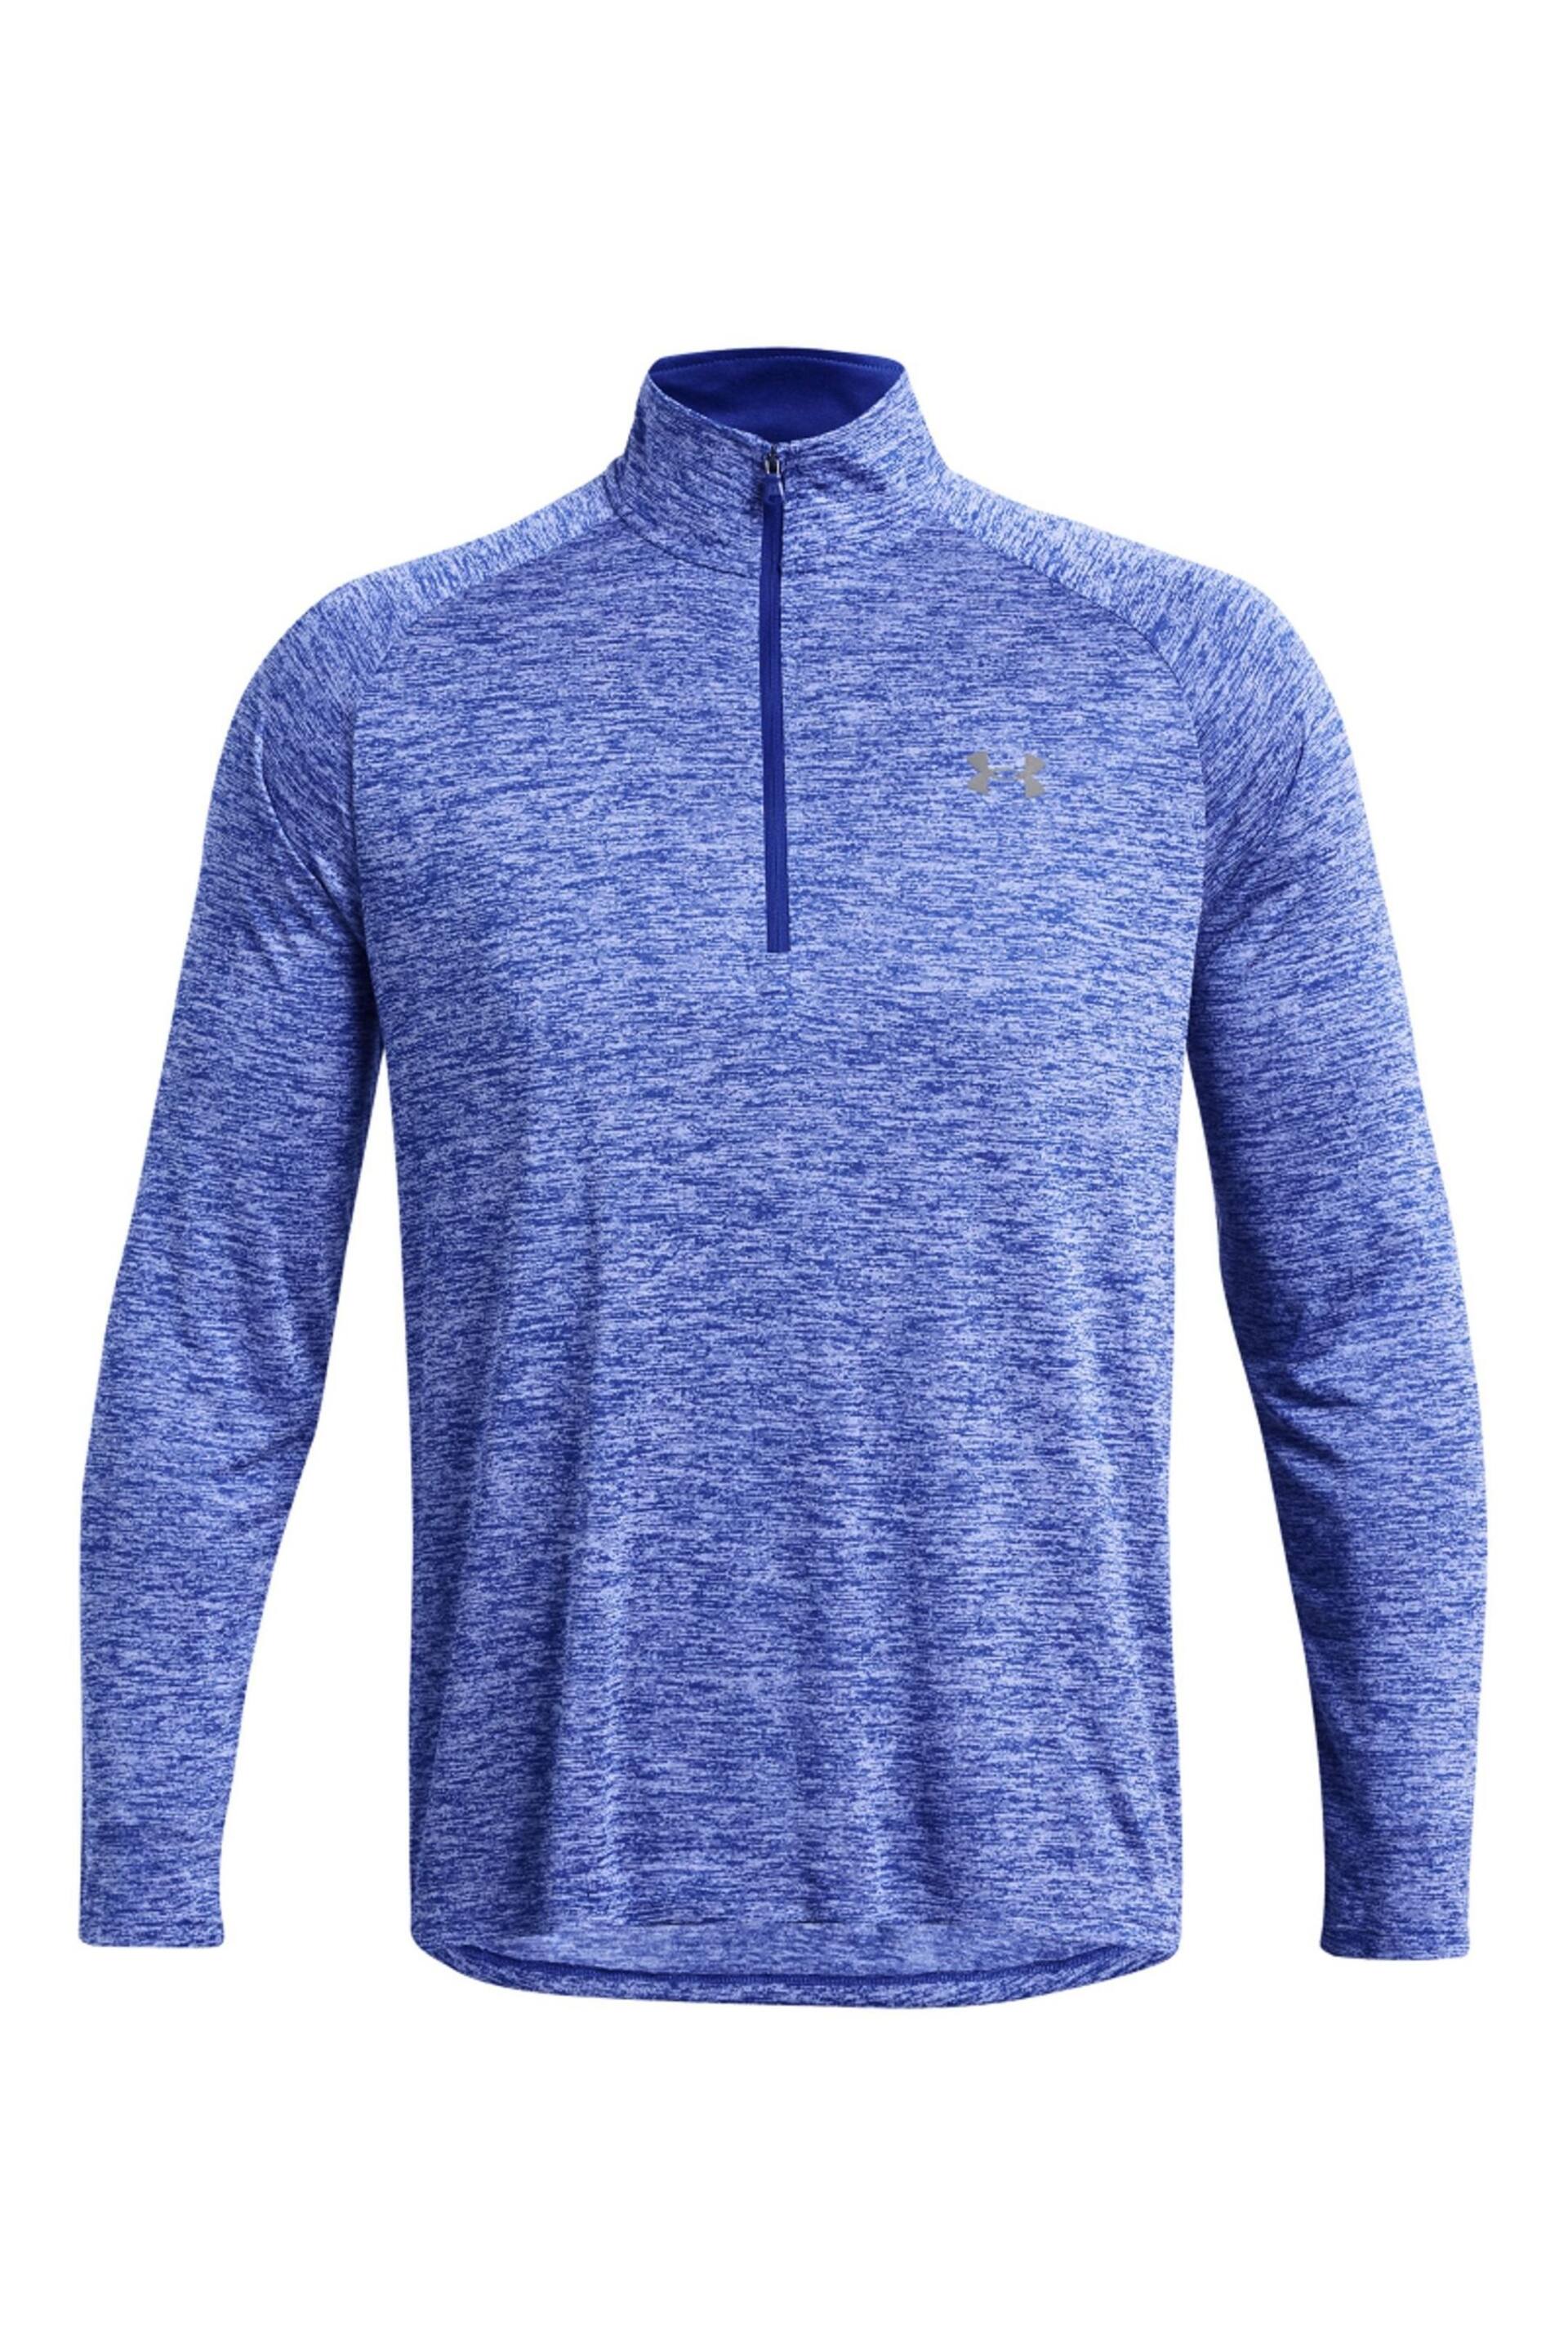 Under Armour Bright Blue Under Armour Bright Blue Tech 2.0 1/2 Zip Top - Image 4 of 6